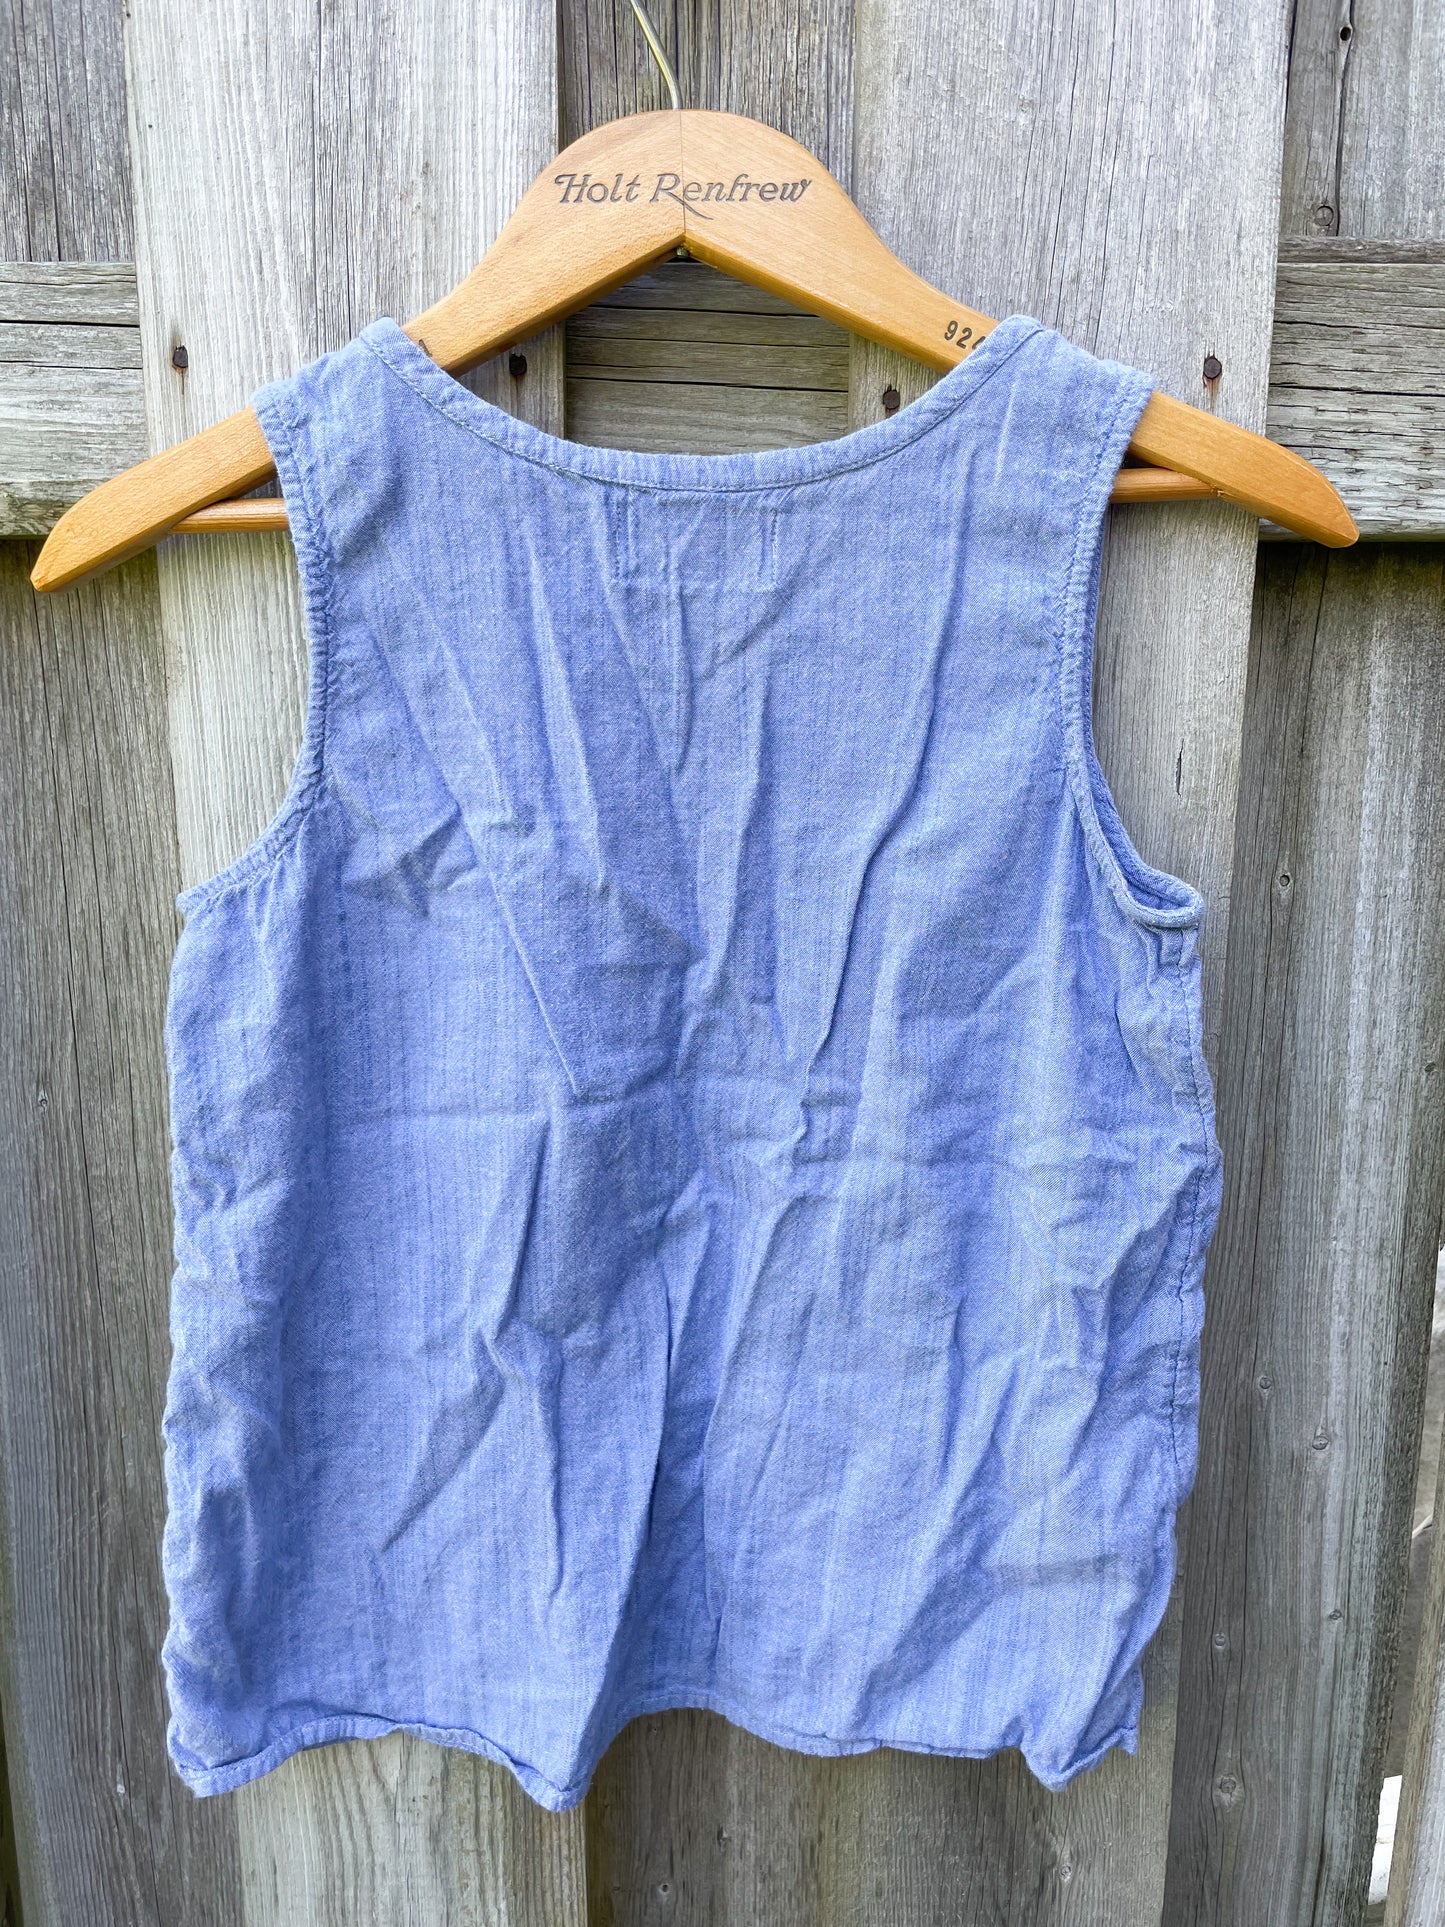 Old Navy Cotton Chambray Embroidered Tassel Top - XS/S